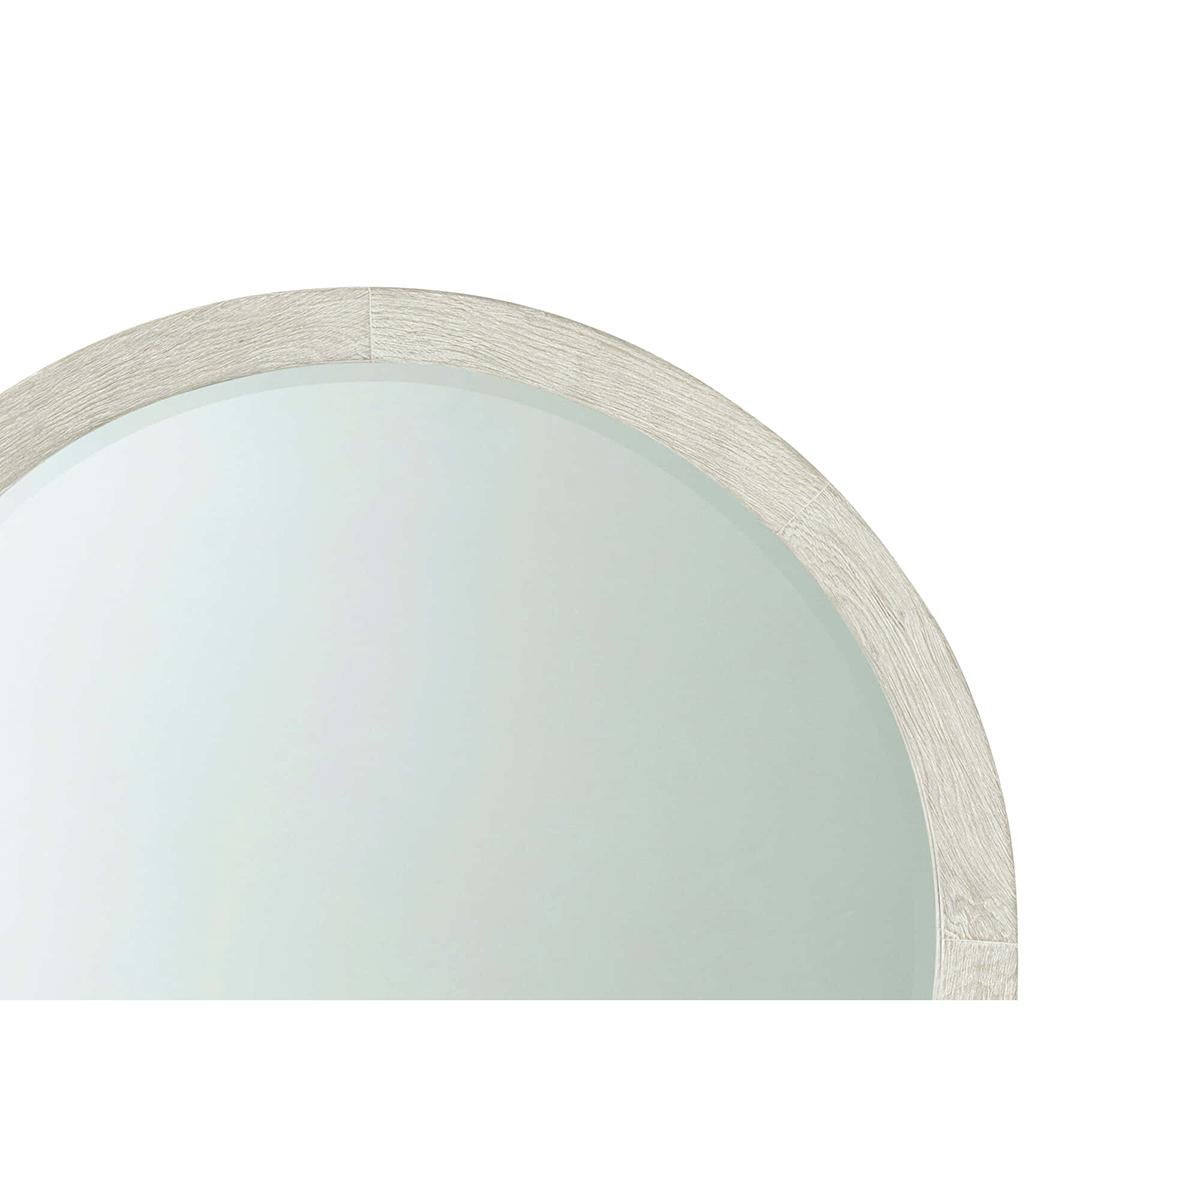 Modern coastal round mirror, Inspired by an organically modern design, this round mirror is crafted from wire-brushed cerused pine wood in our new Sea Salt finish and offers a fresh take on a classic silhouette.
Dimensions: 44